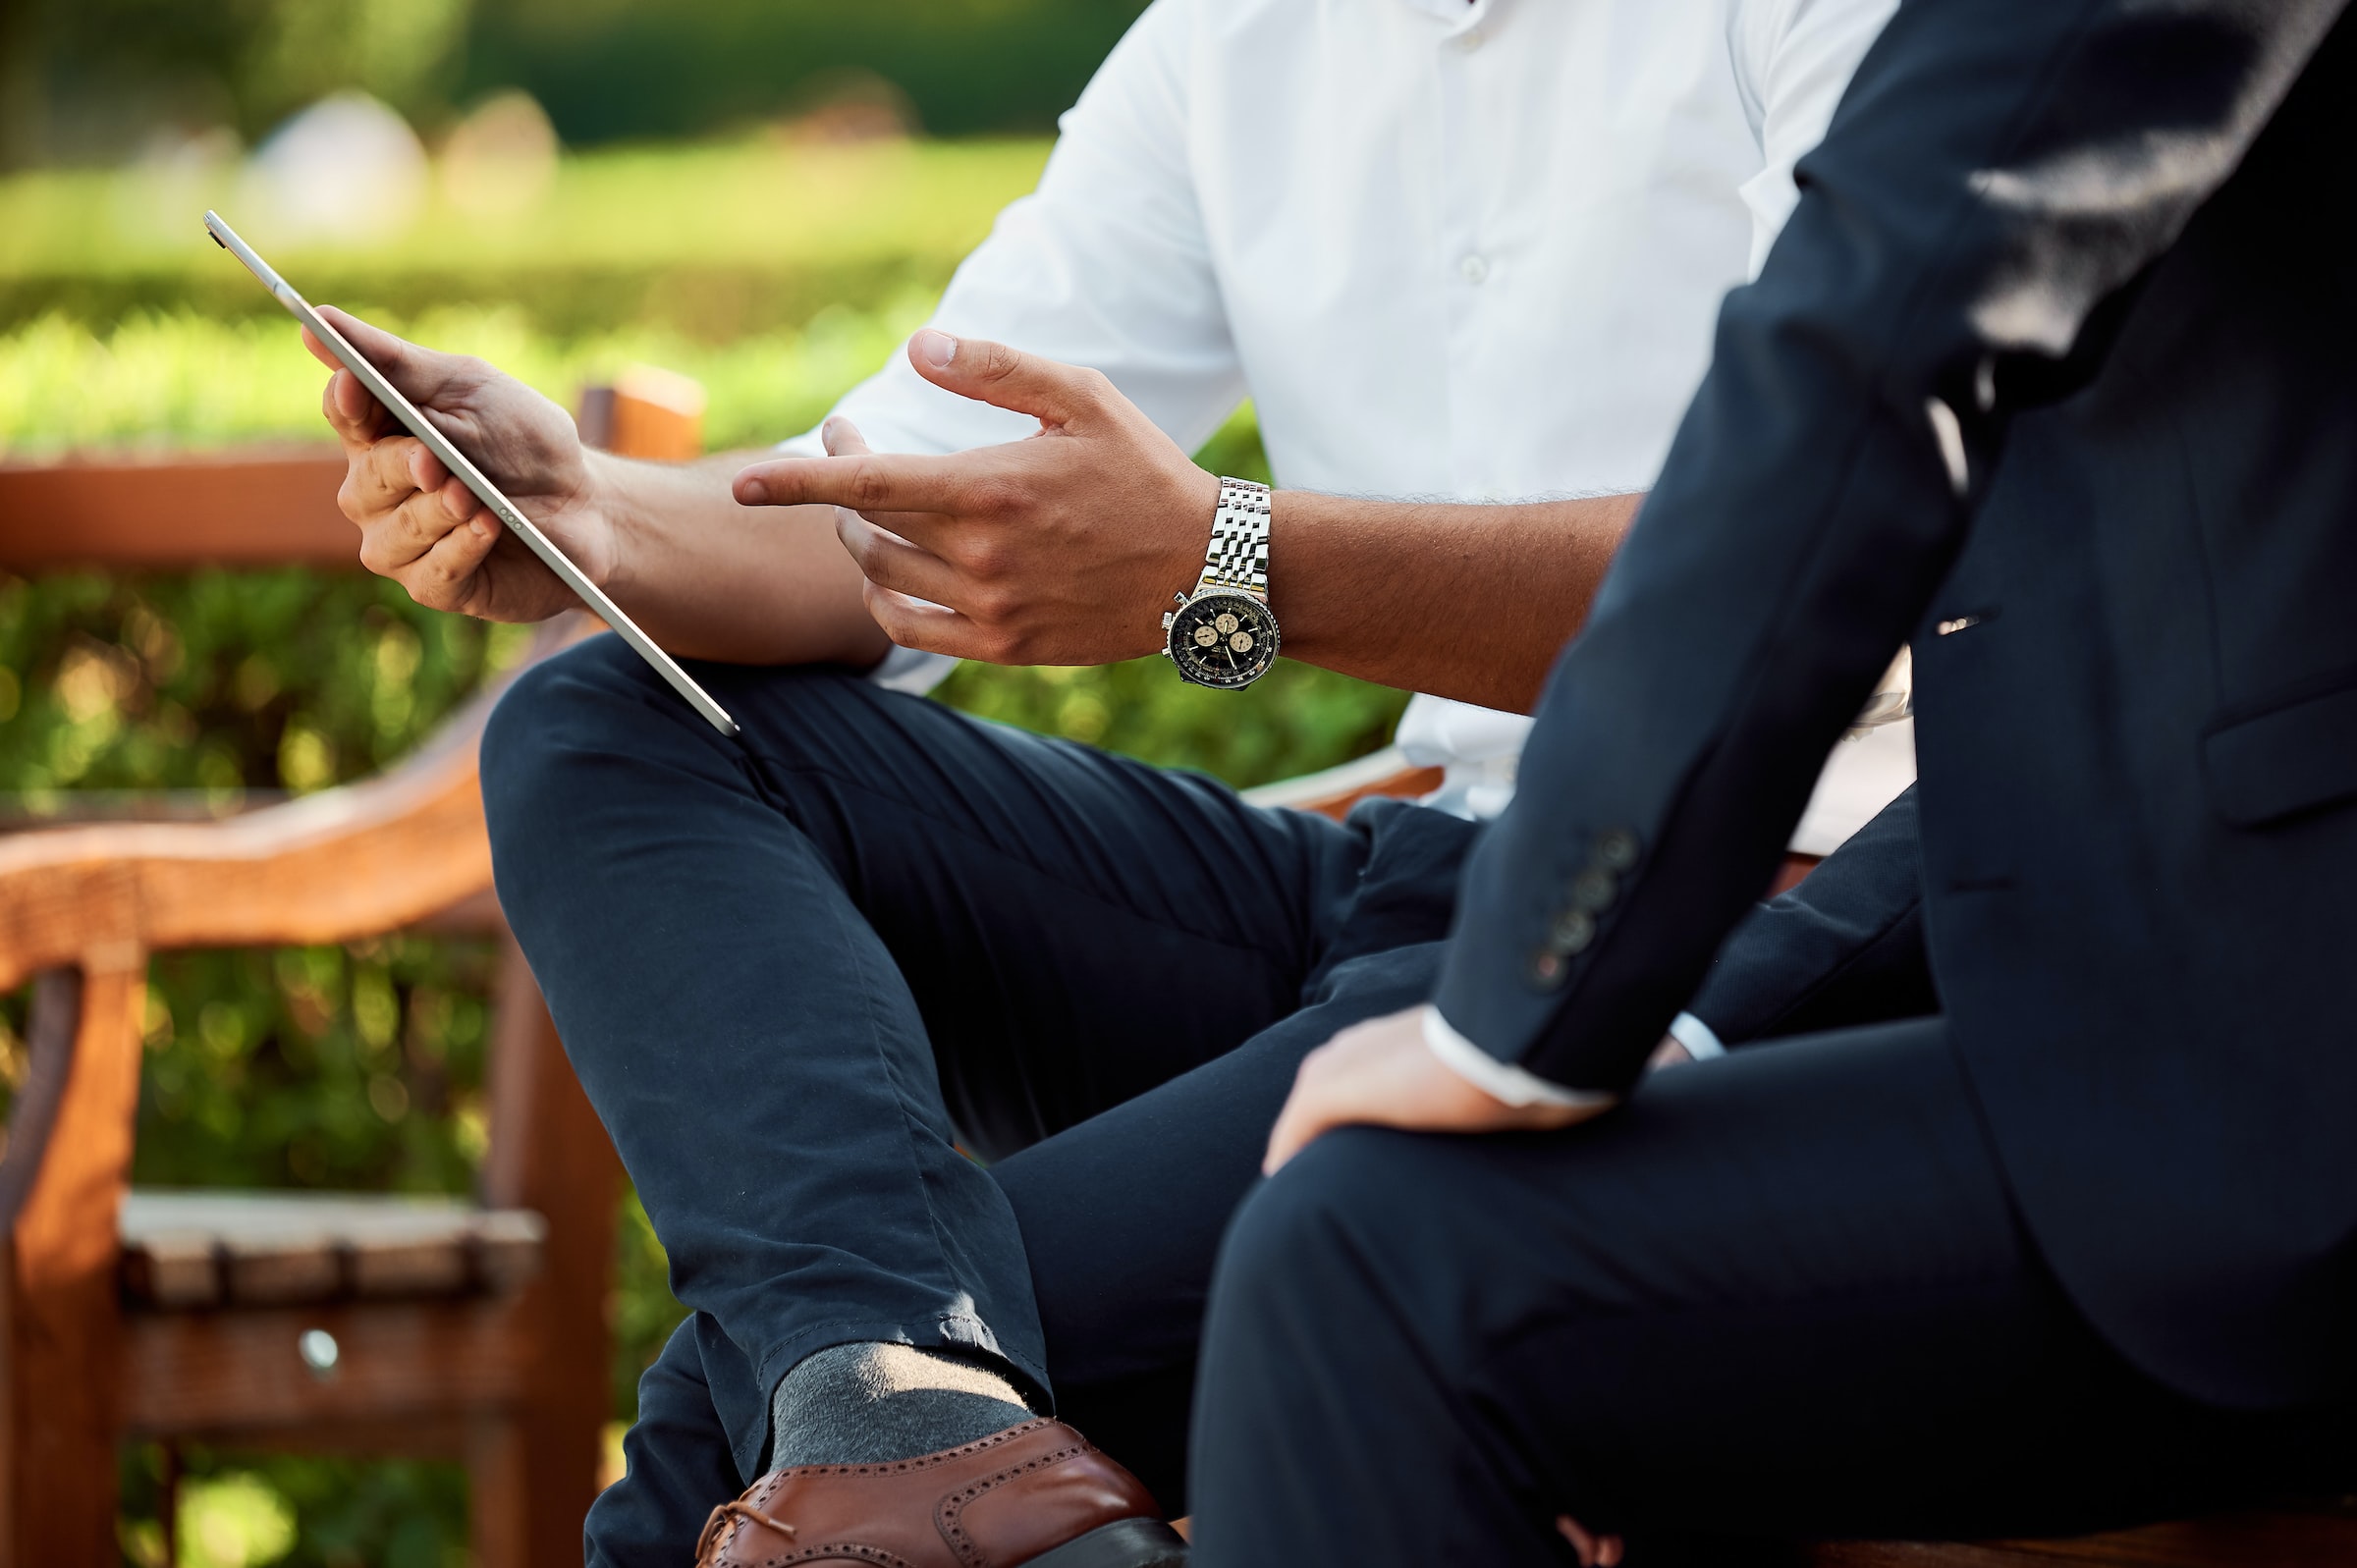 businessmen are discussing while sitting on a park bench stock image